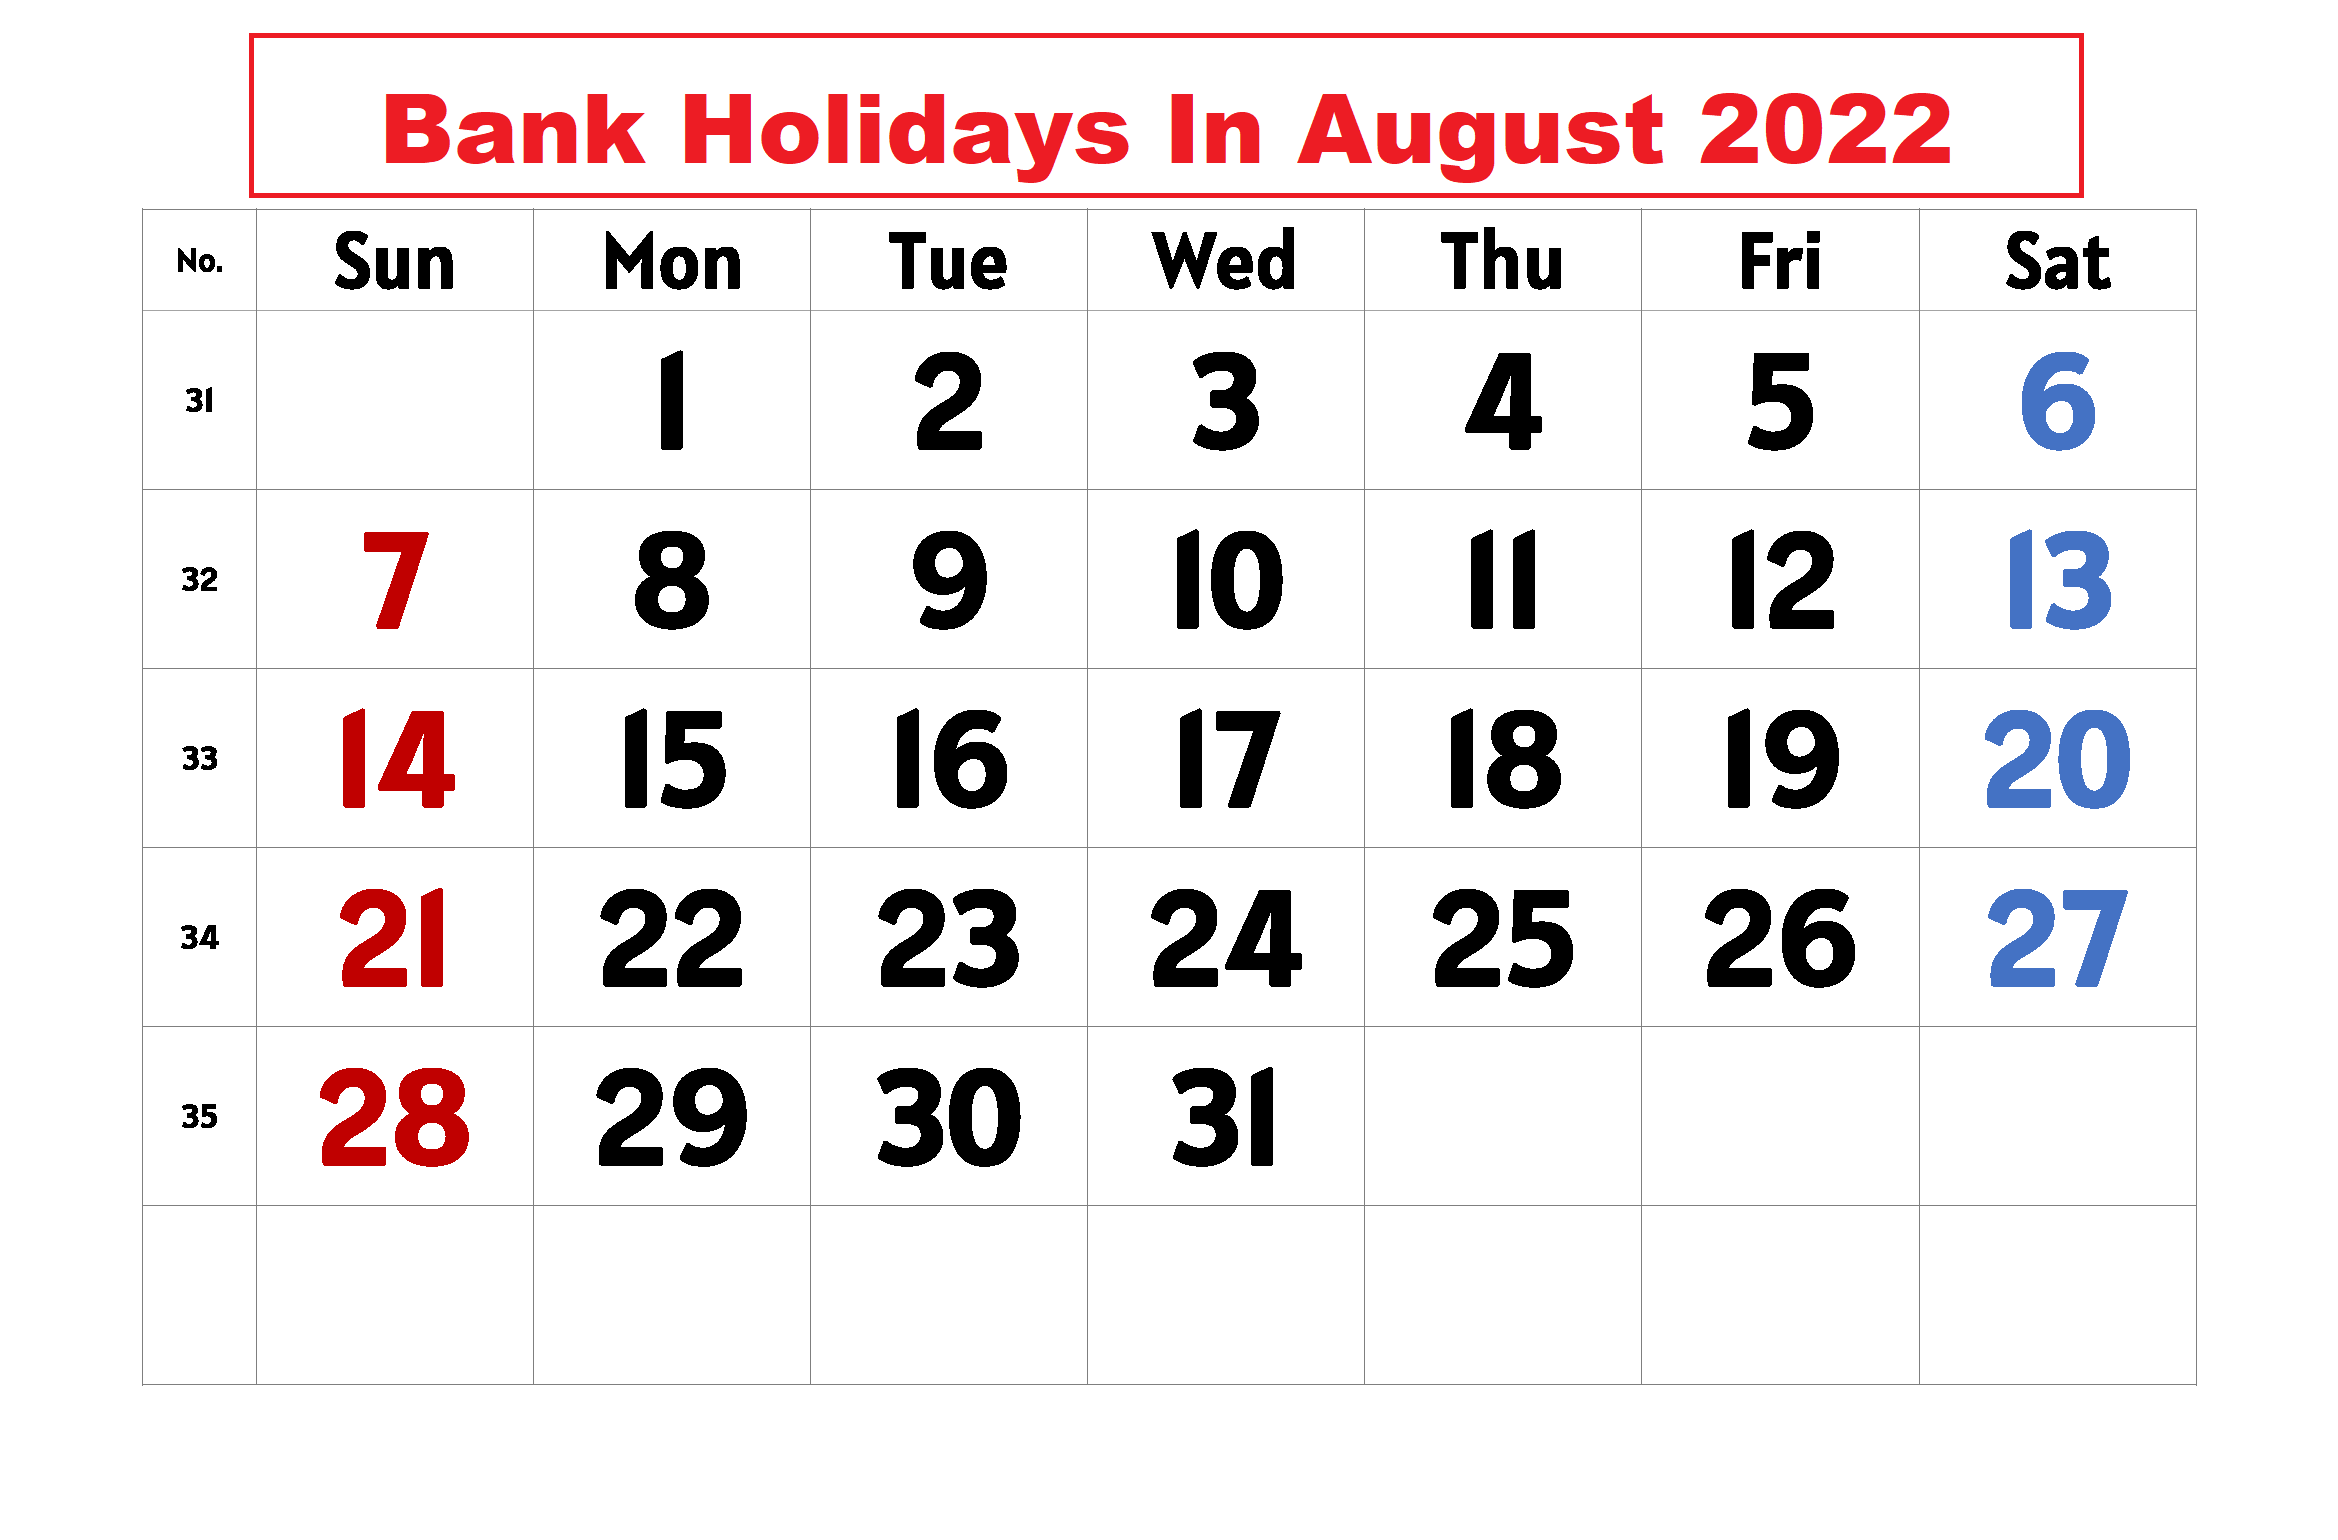 Bank Holidays In August 2022